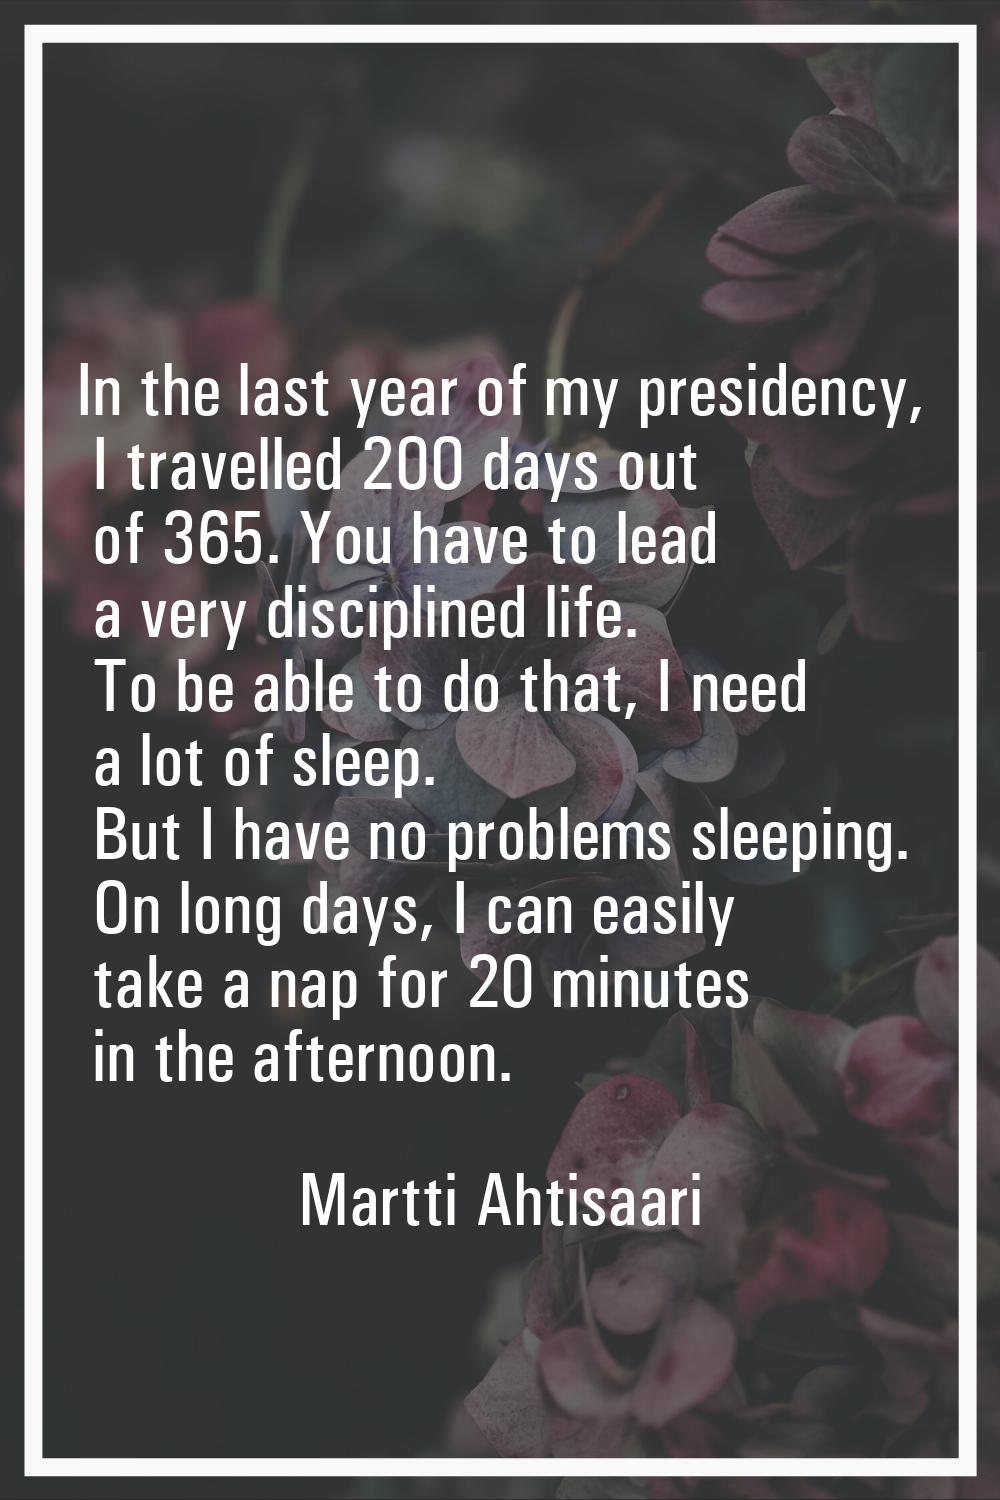 In the last year of my presidency, I travelled 200 days out of 365. You have to lead a very discipl